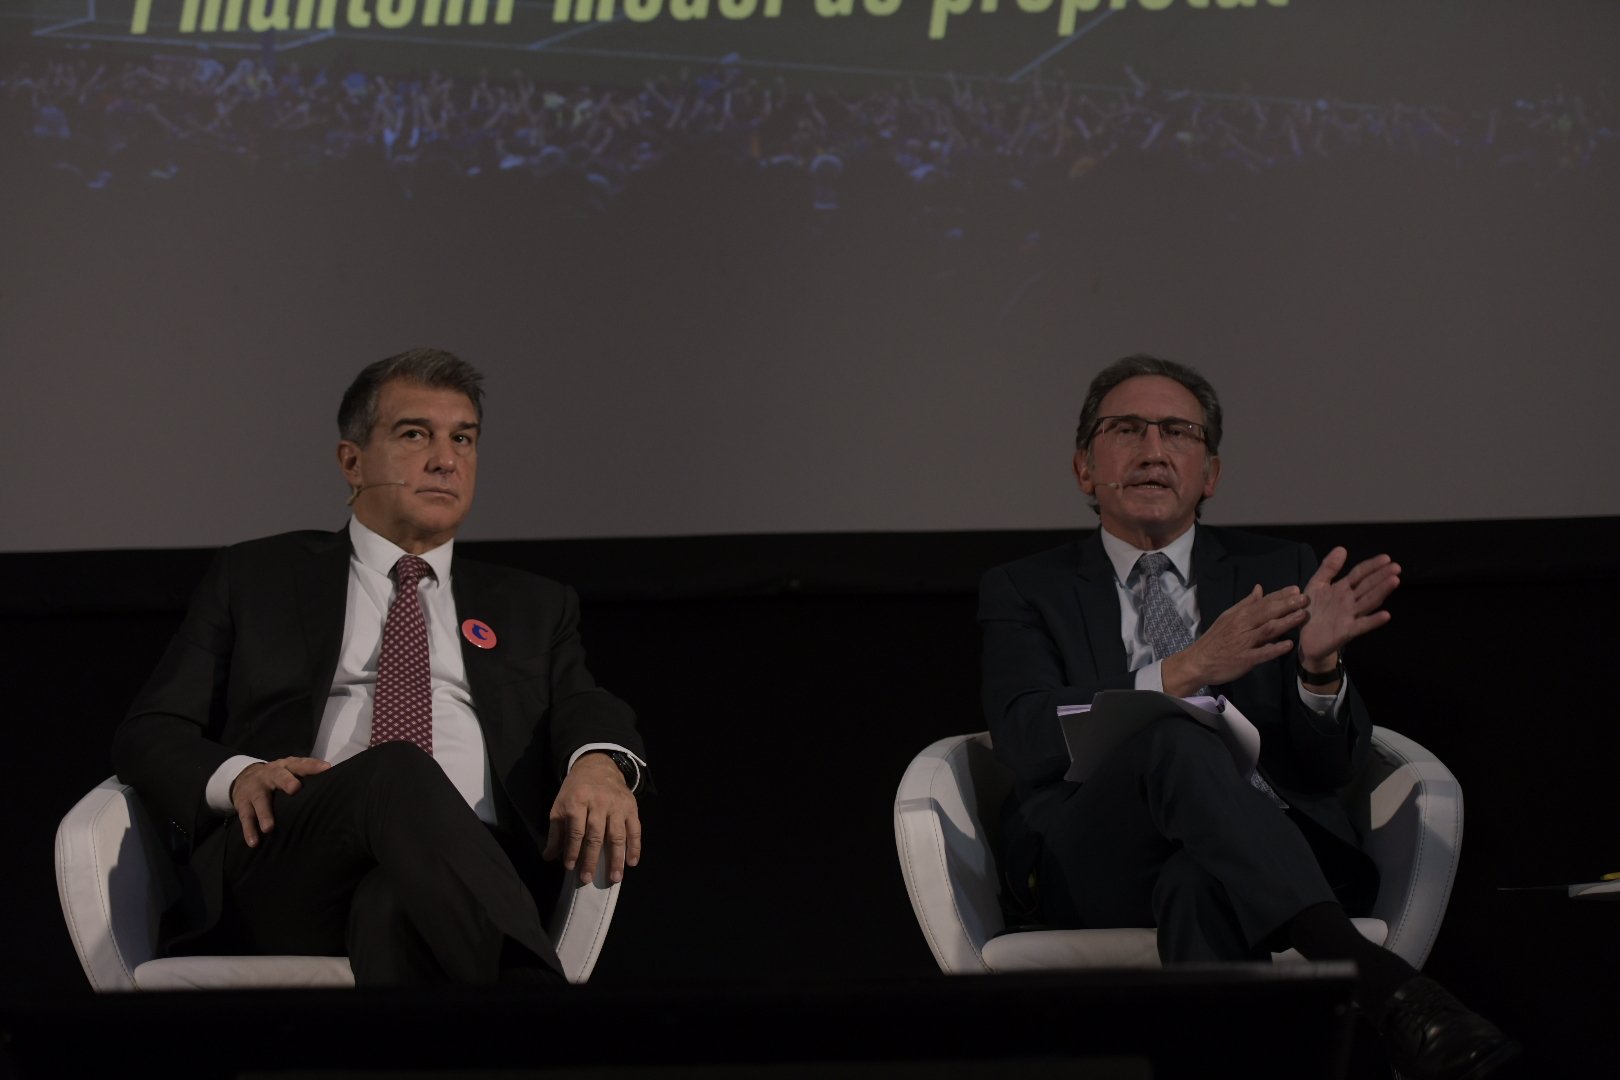 Laporta's economic plan for Barça: a sustainable club in the hands of its members